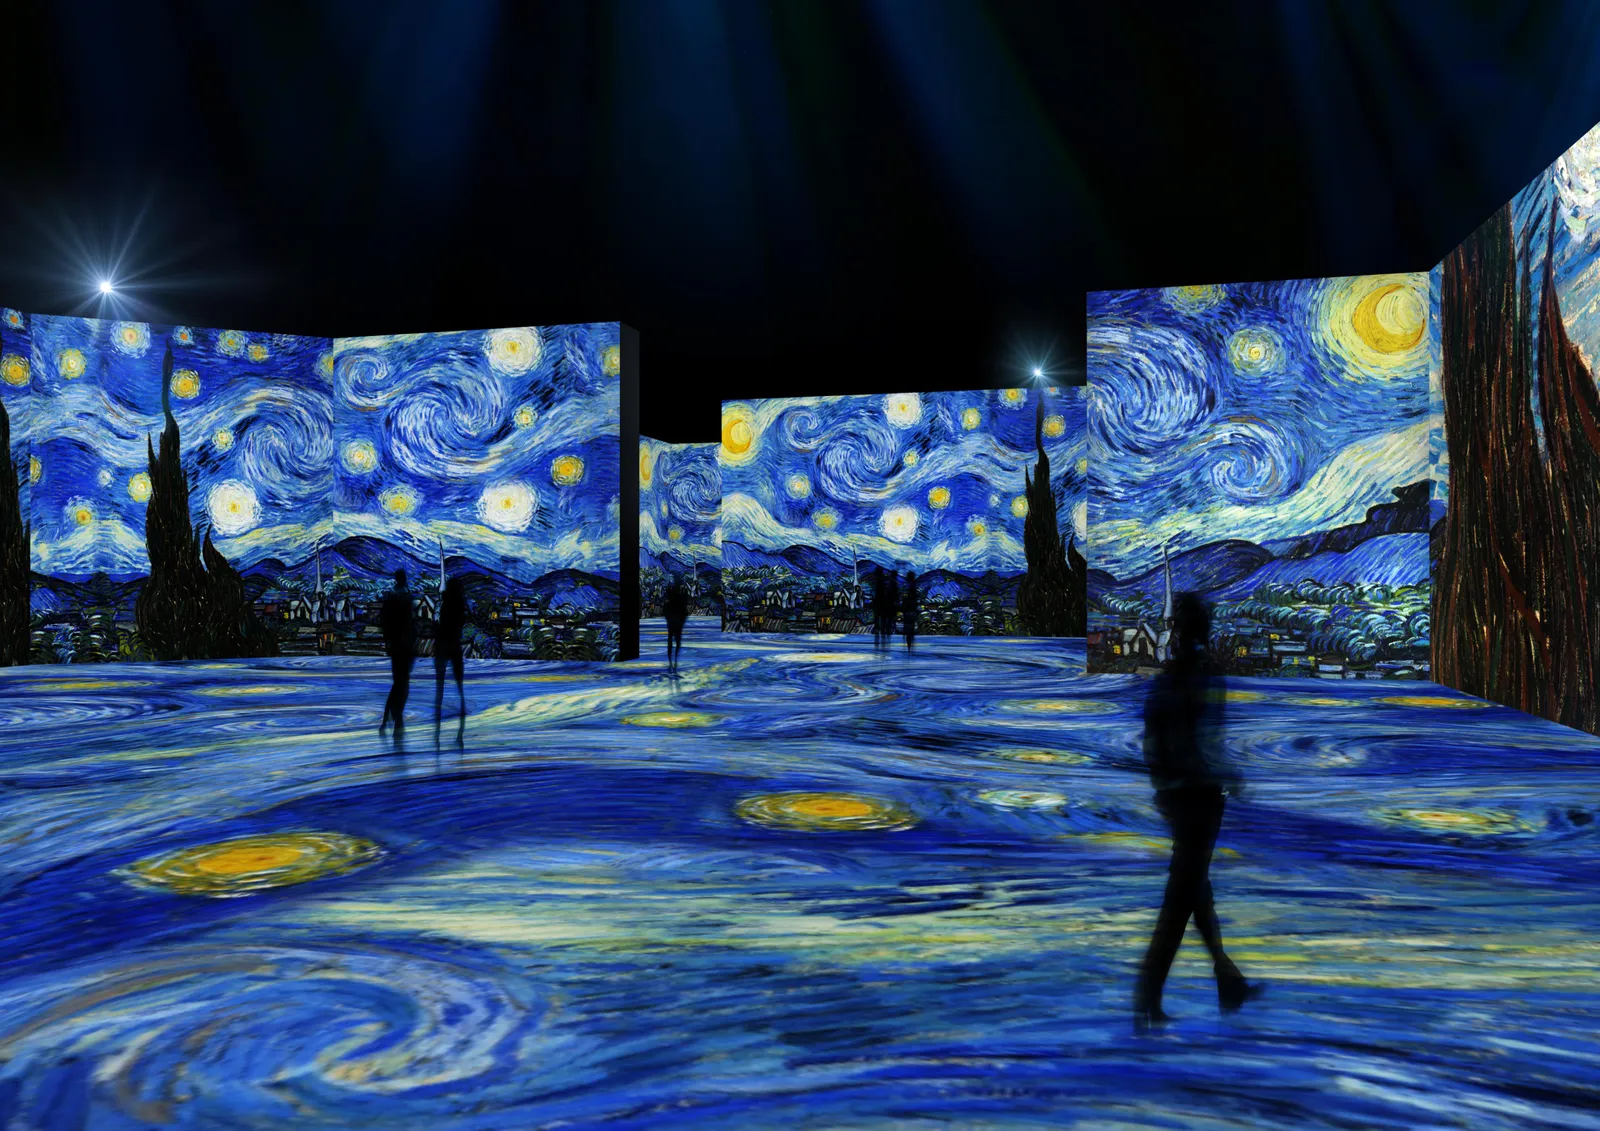 The Starry Night - Vincent van Gogh  Reproductions of famous paintings for  your wall